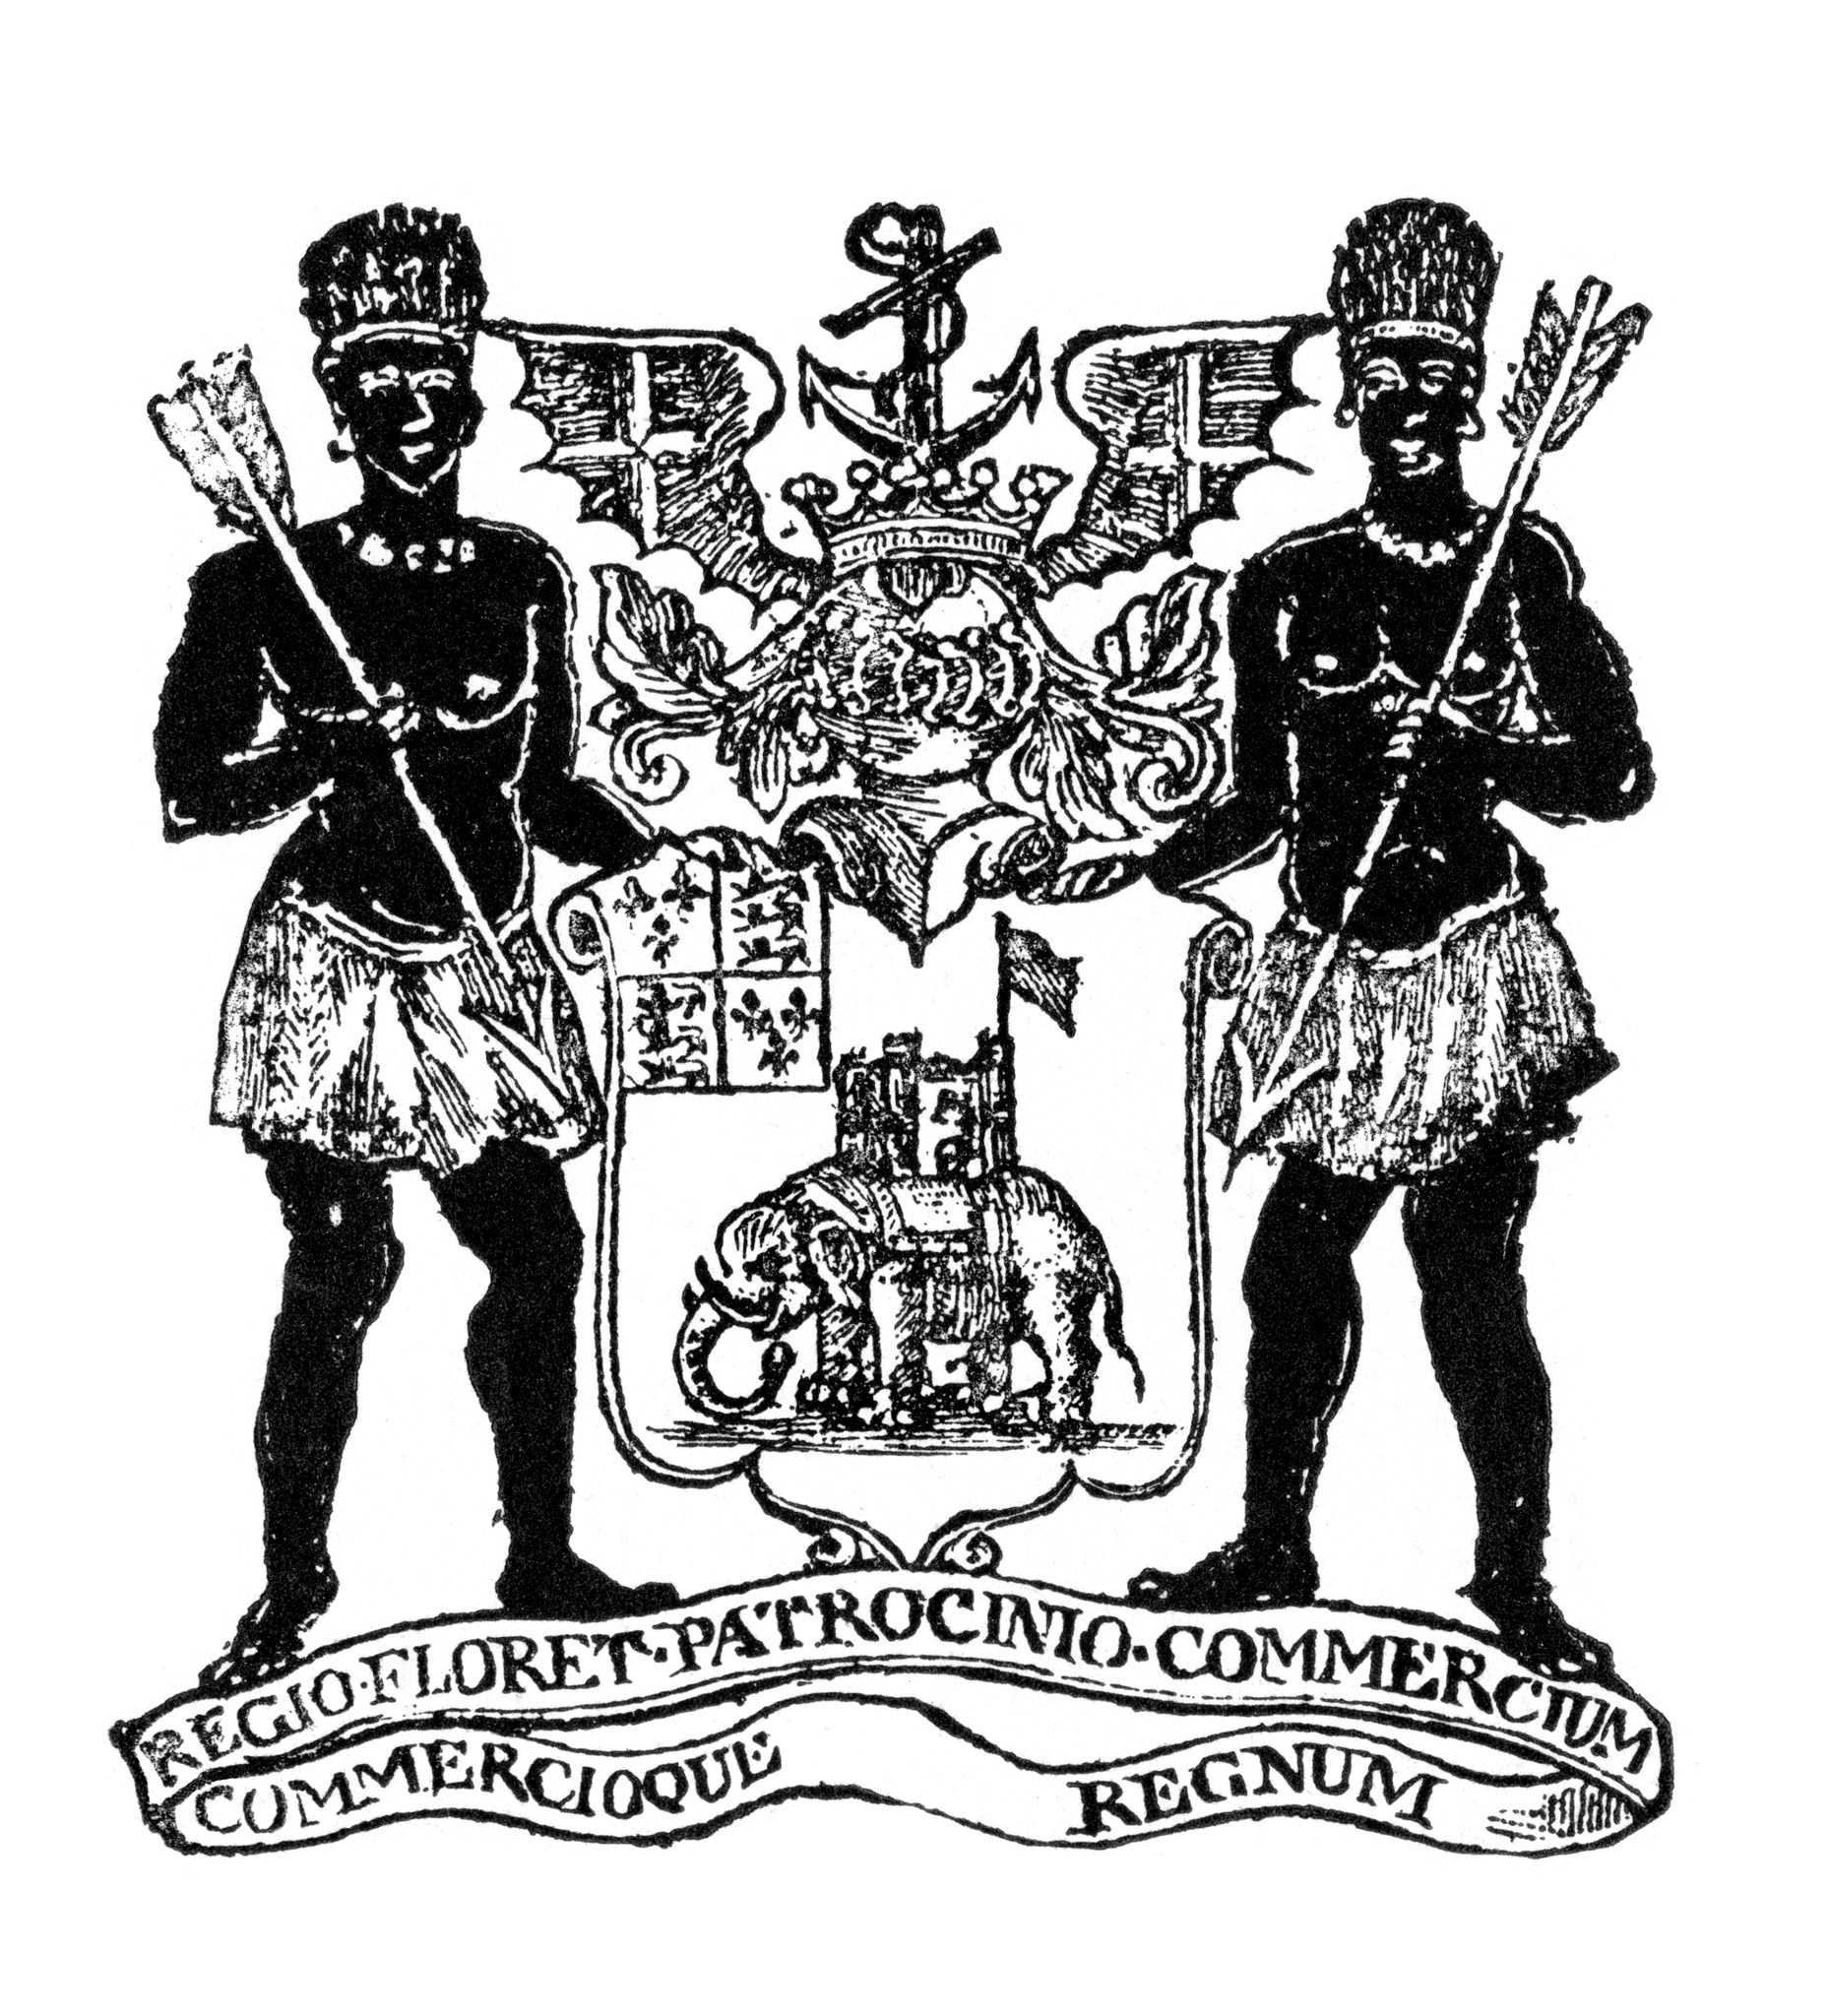 Black and white print of Royal Africa Company Logo, which has two men standing next to an emblem.